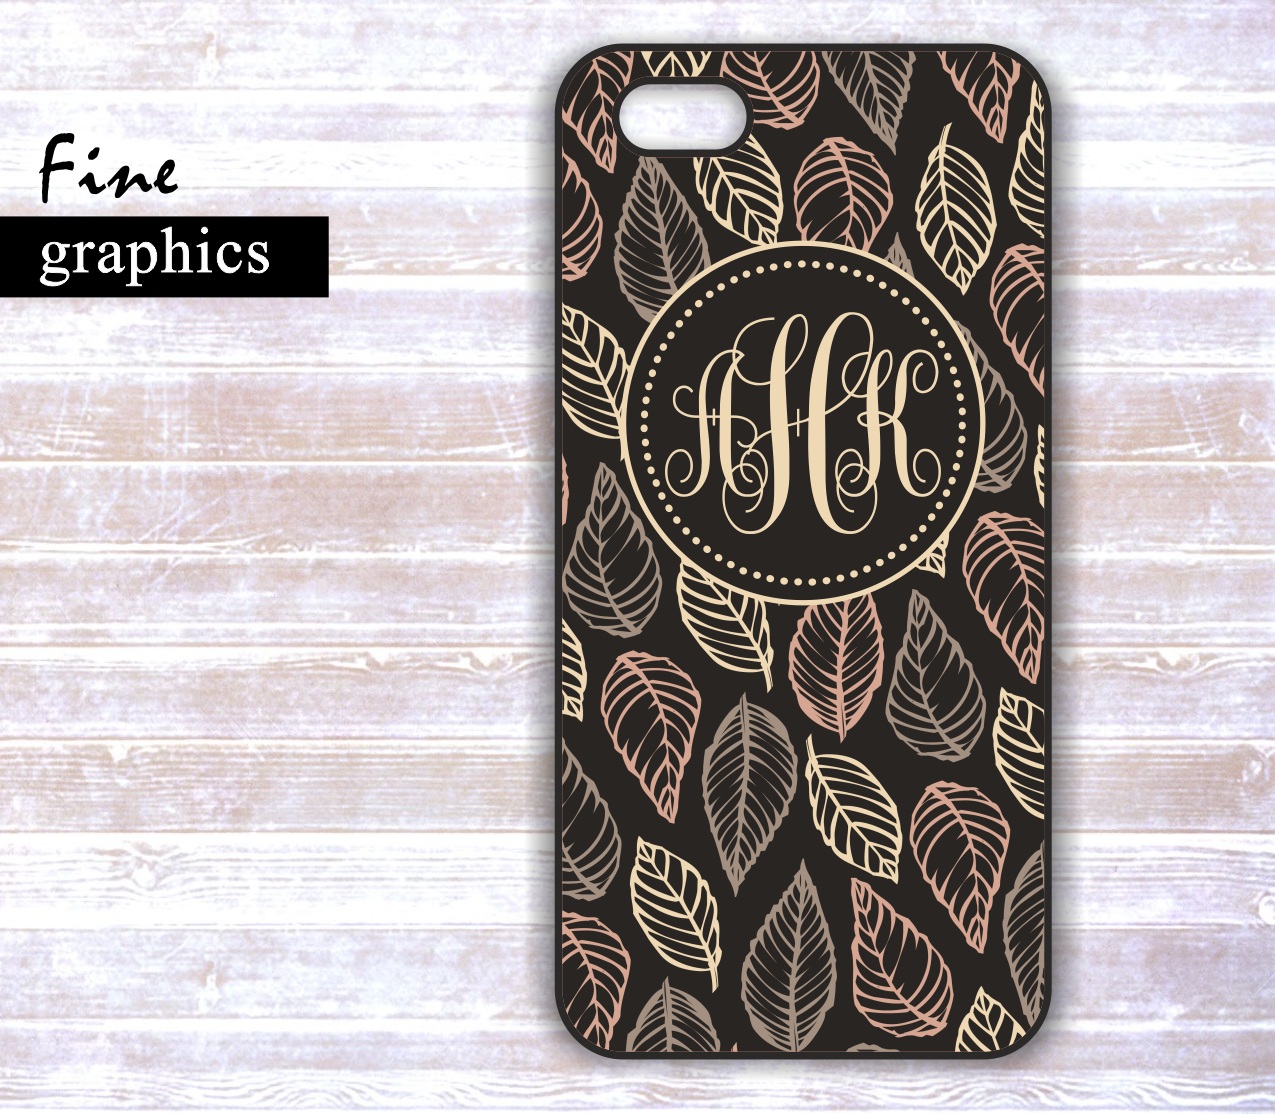 Iphone 5 Case - Iphone 4/4s Case - Samsung Galaxy S3 Case - Monogrammed Personalized Iphone Hard Cover